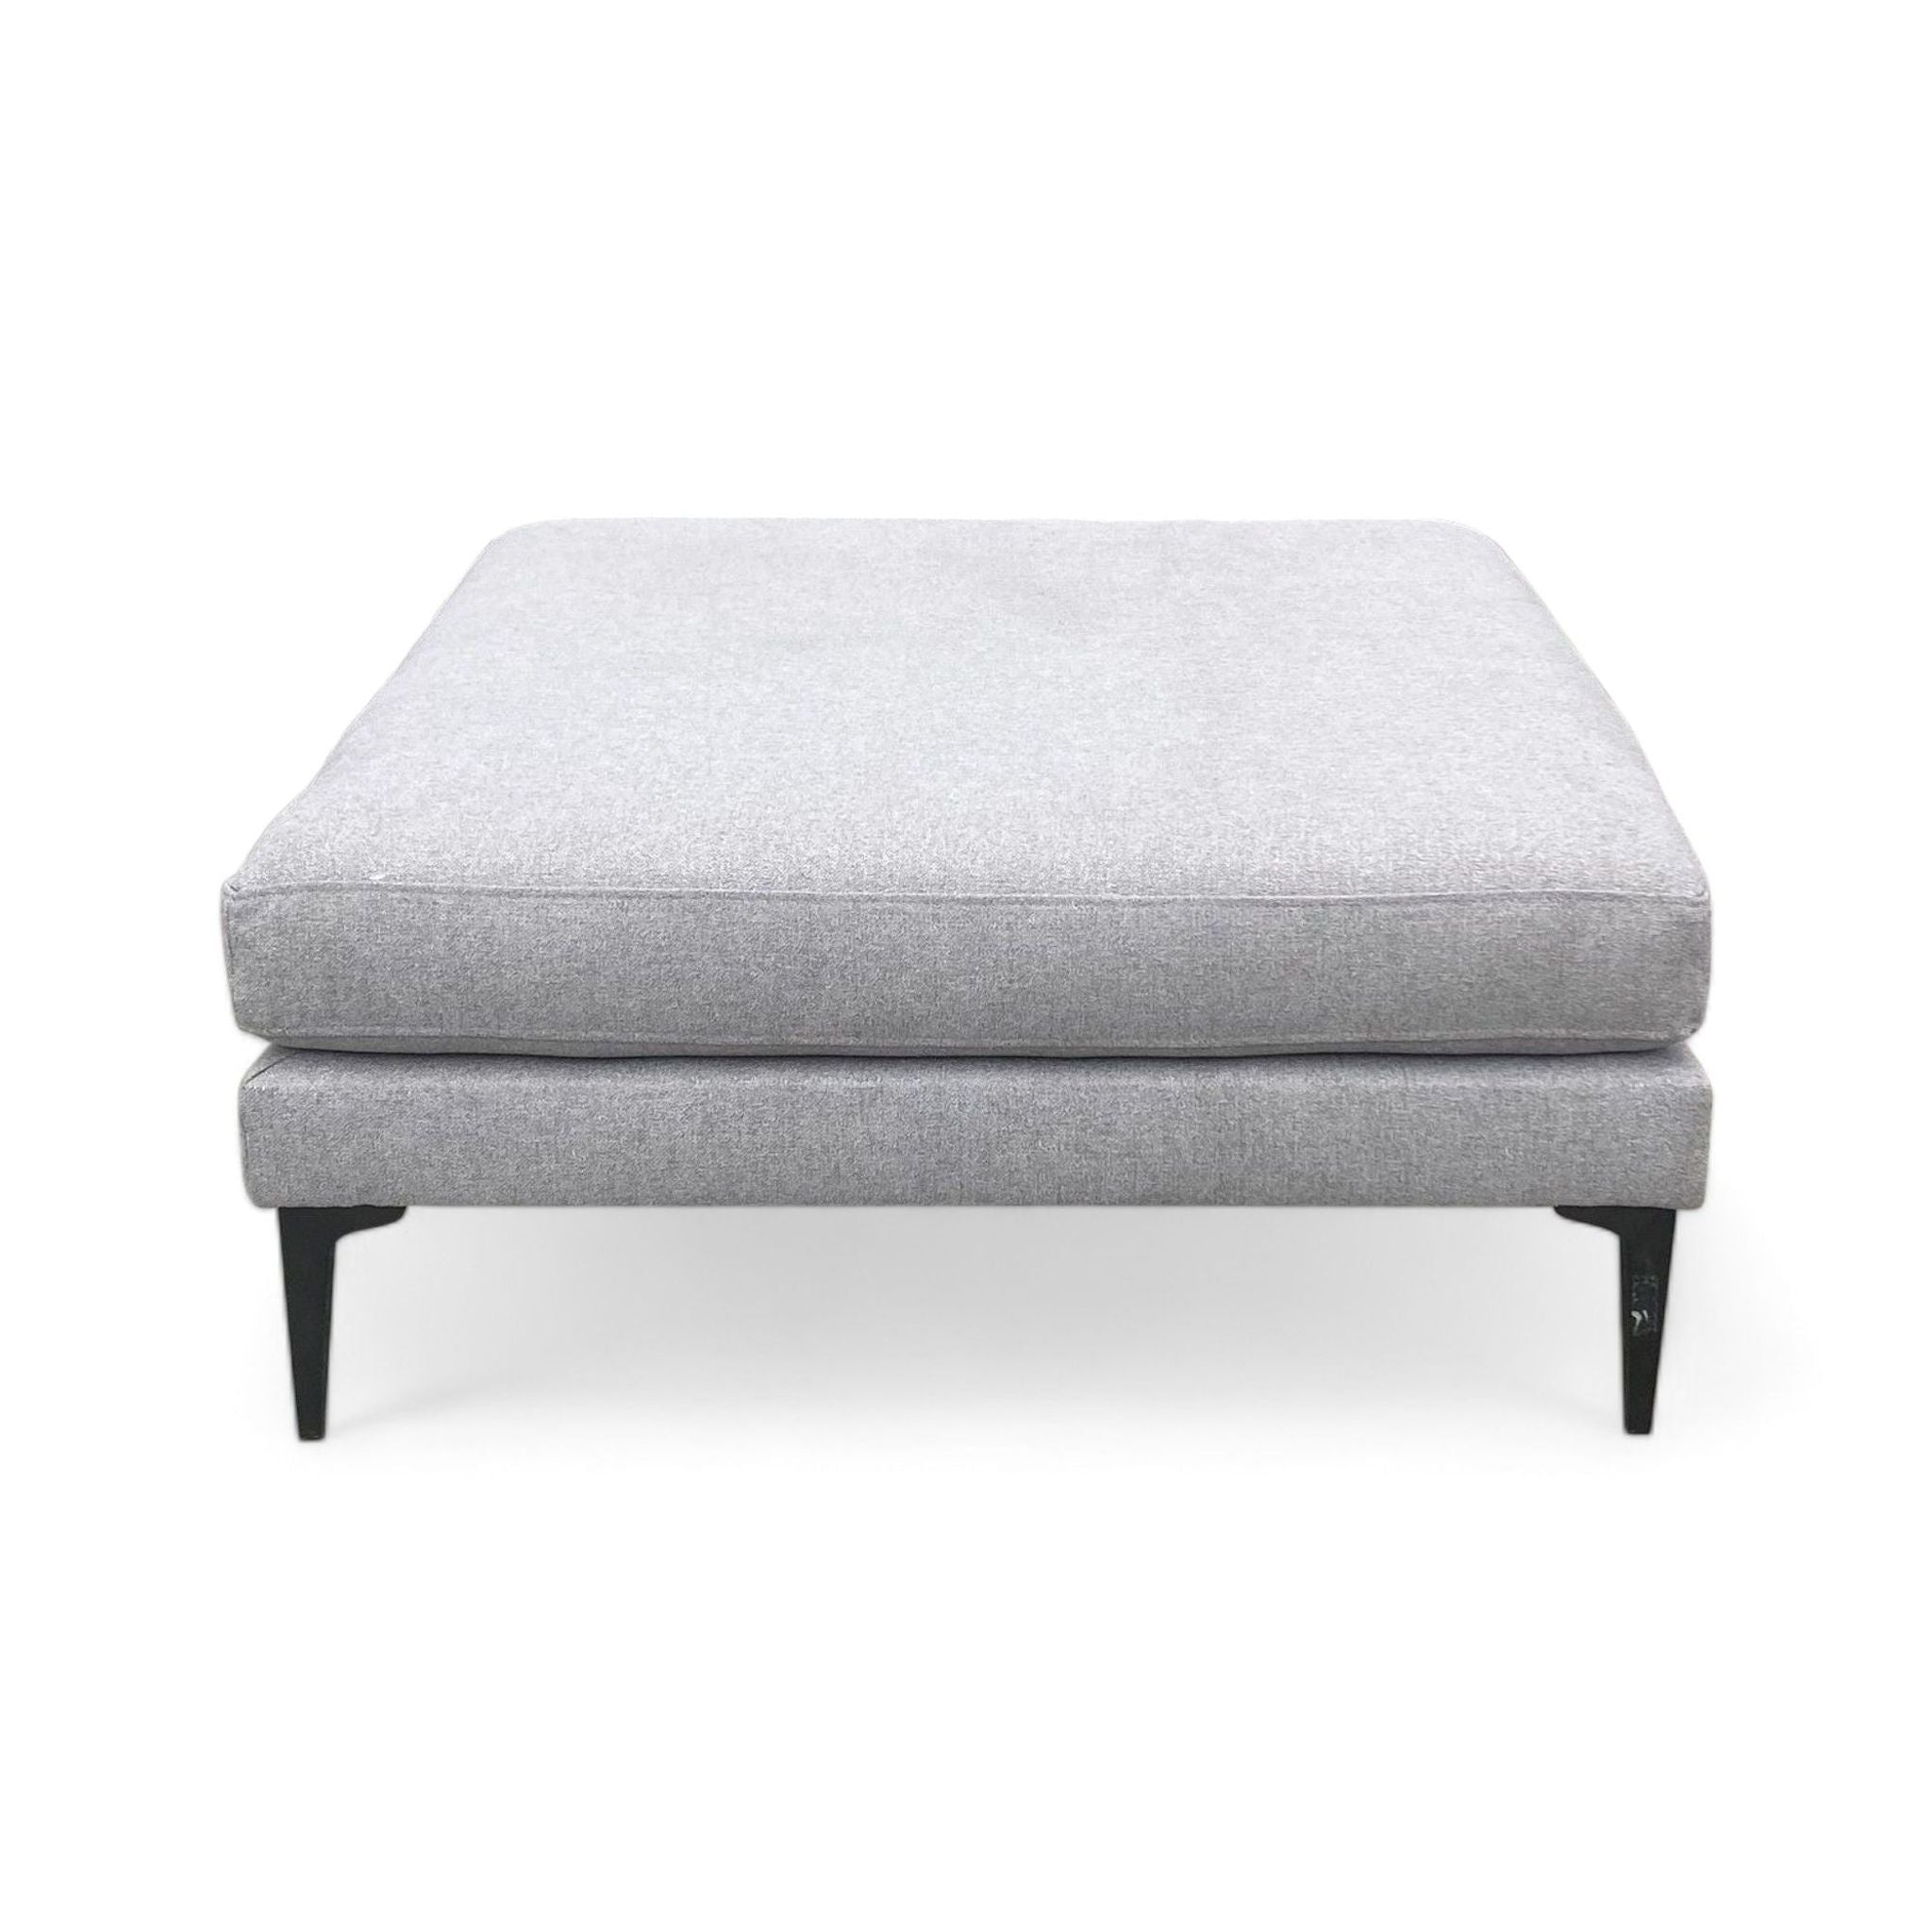 Alt text 1: Grey chenille tweed ottoman with 40" square cushion on dark pewter metal legs by West Elm.